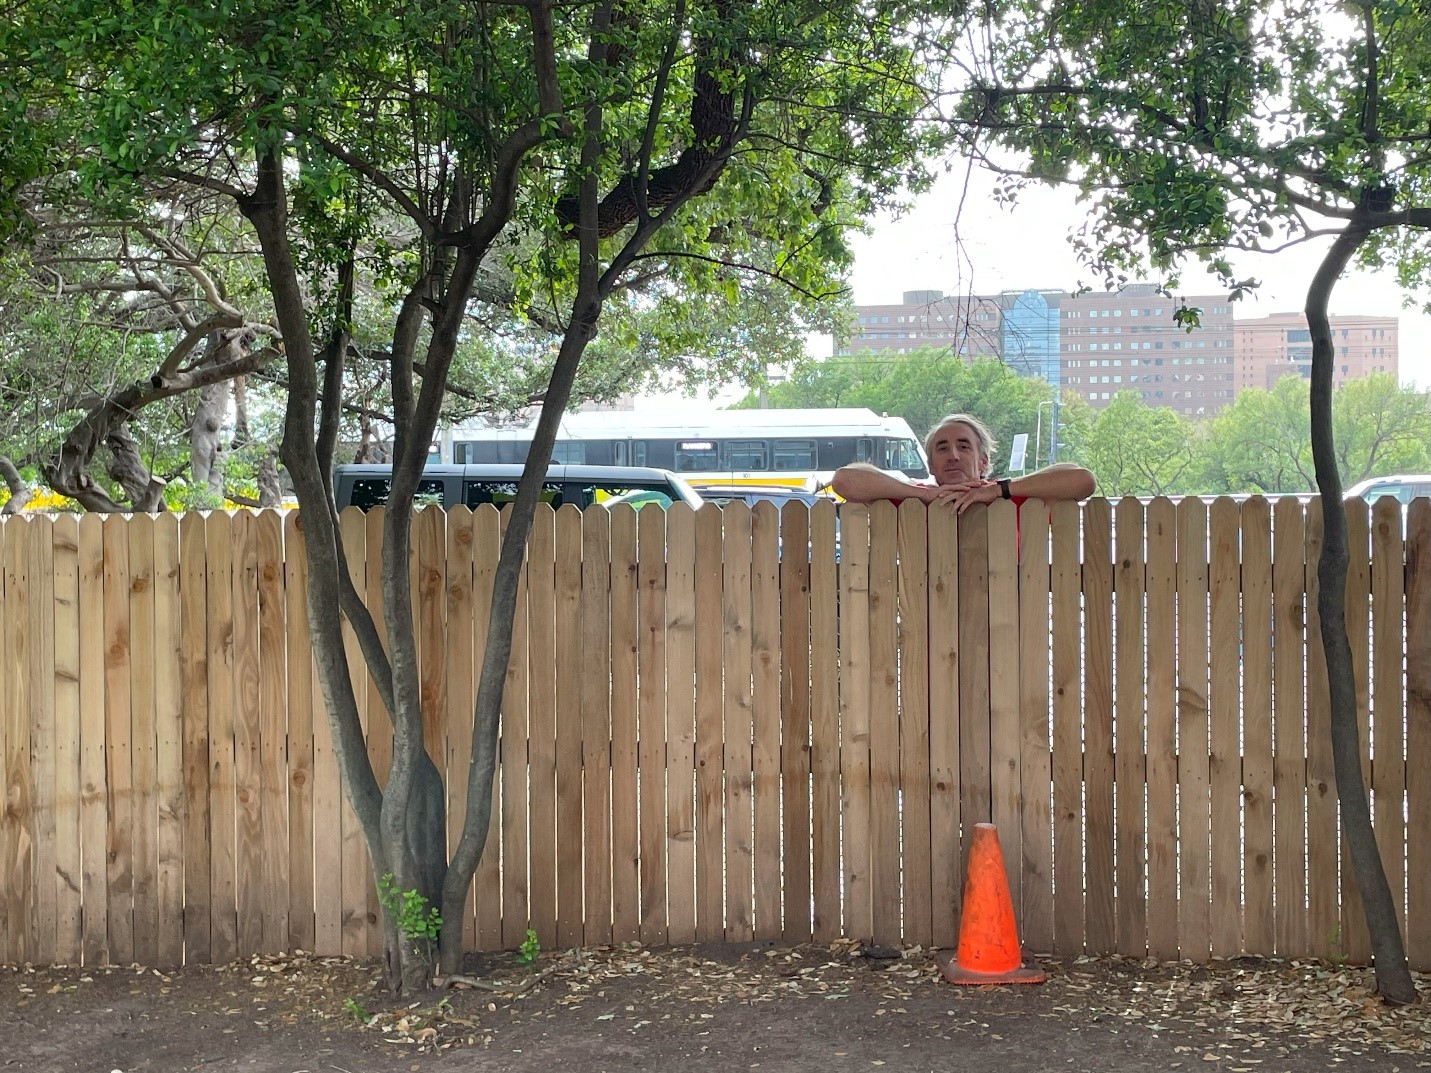 Conspiracy theories usually point to a second shooter or only shooter, depending on the version, hiding behind this fence.